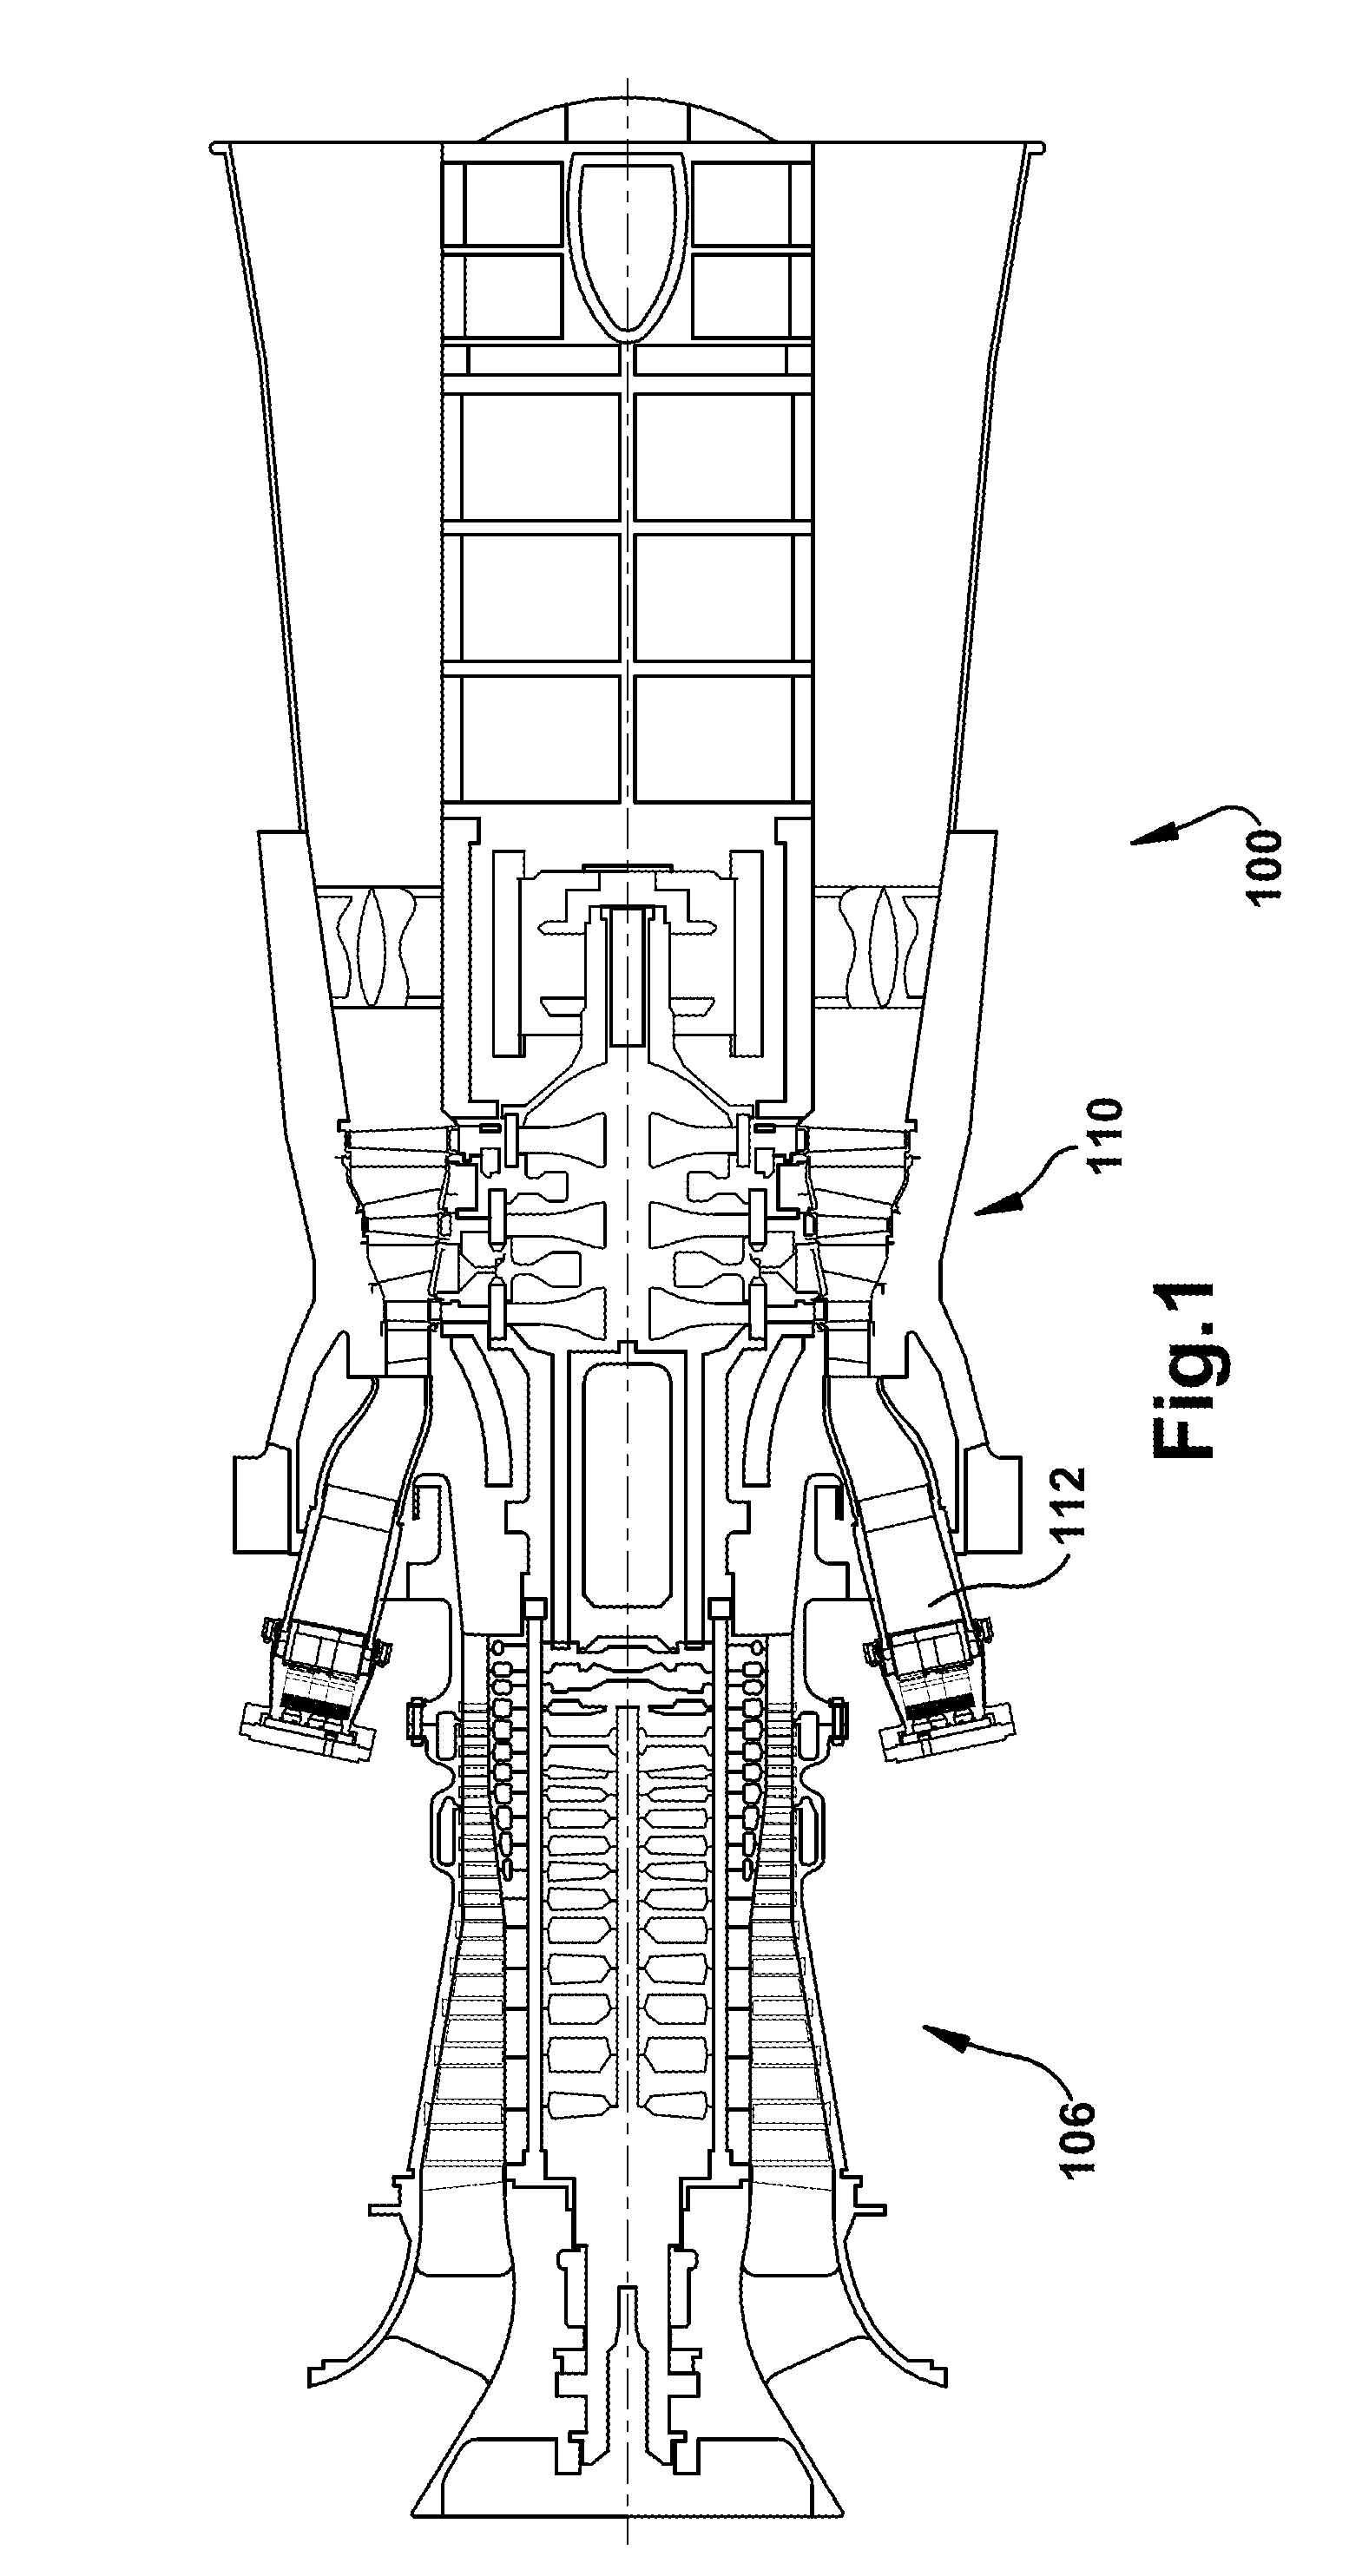 Methods relating to gas turbine control and operation